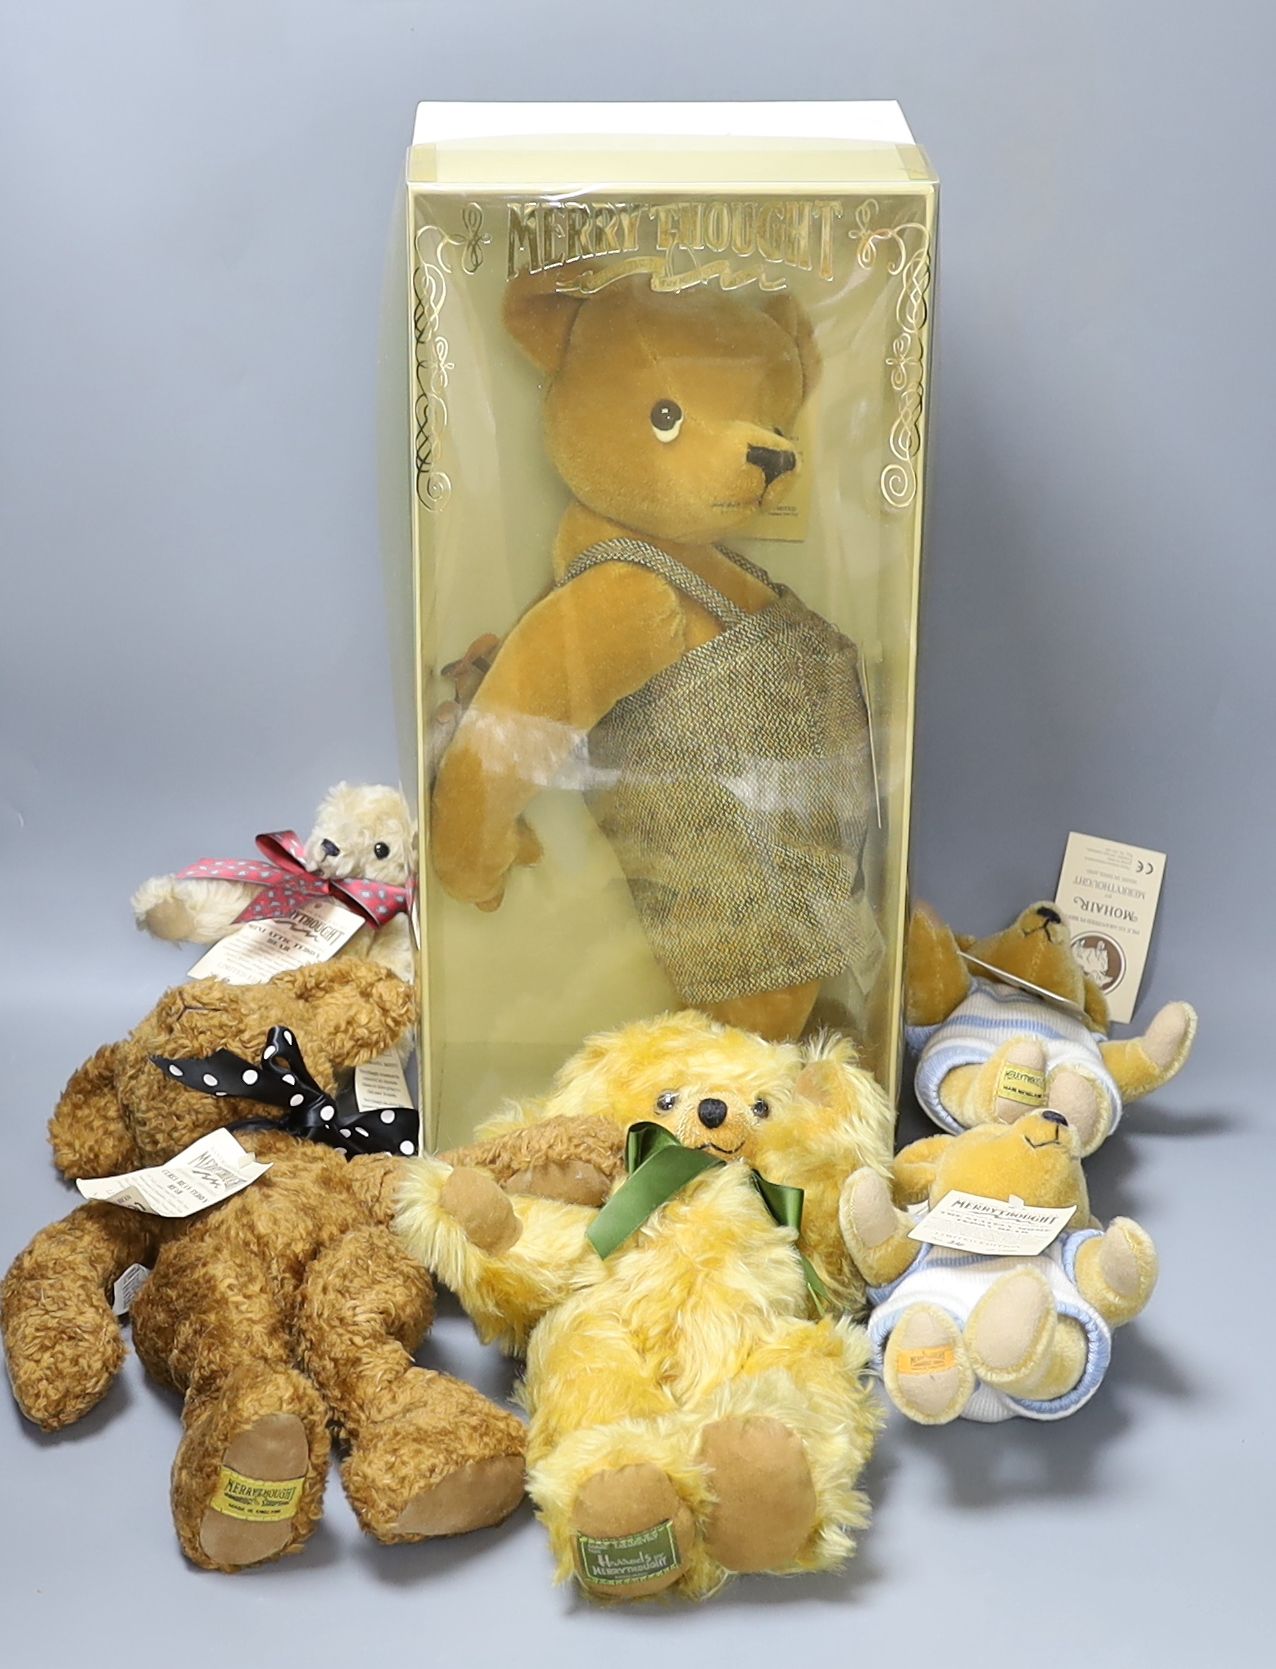 Three boxed limited edition Merrythought with five other limited edition Merrythought Bears